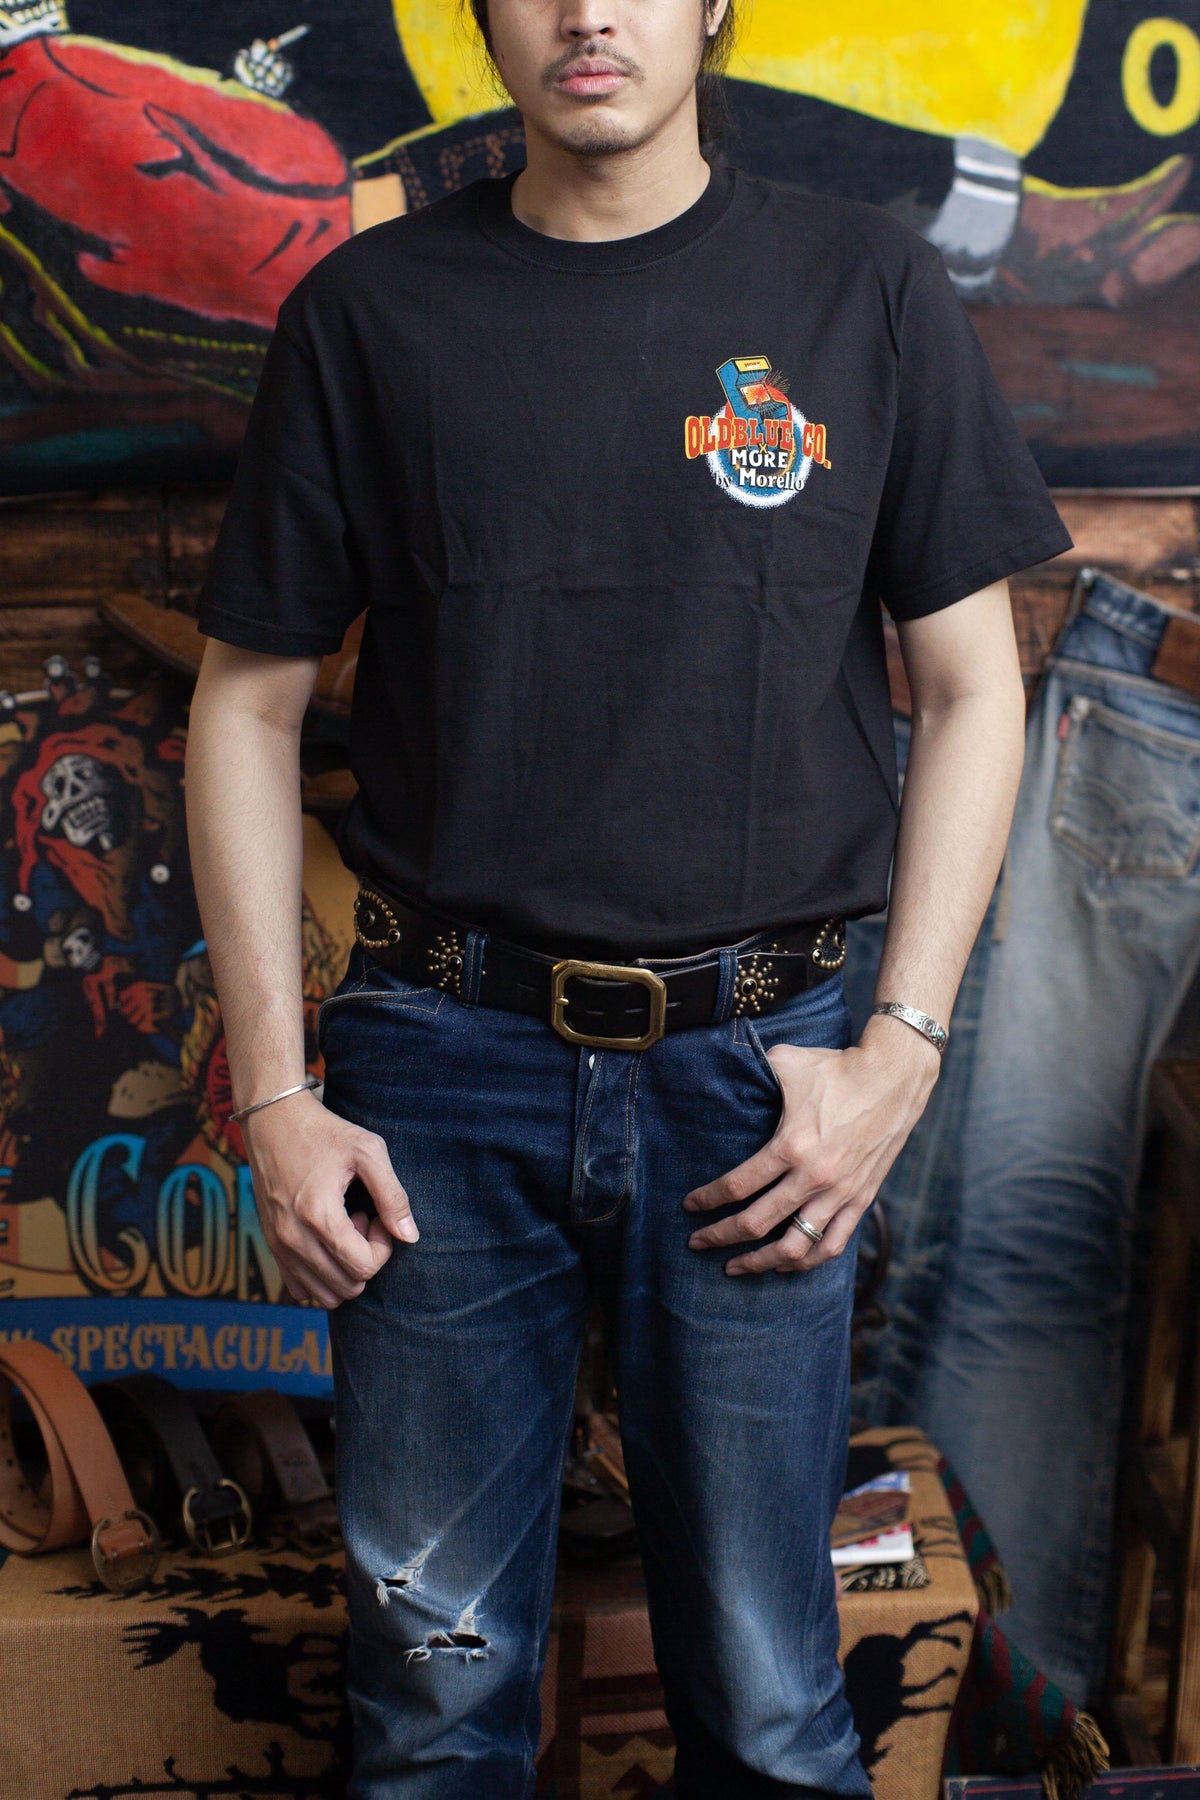 Oldblue Co. x MORE by Morello Tee The Arcade Riders Black - MORE by Morello Indonesia